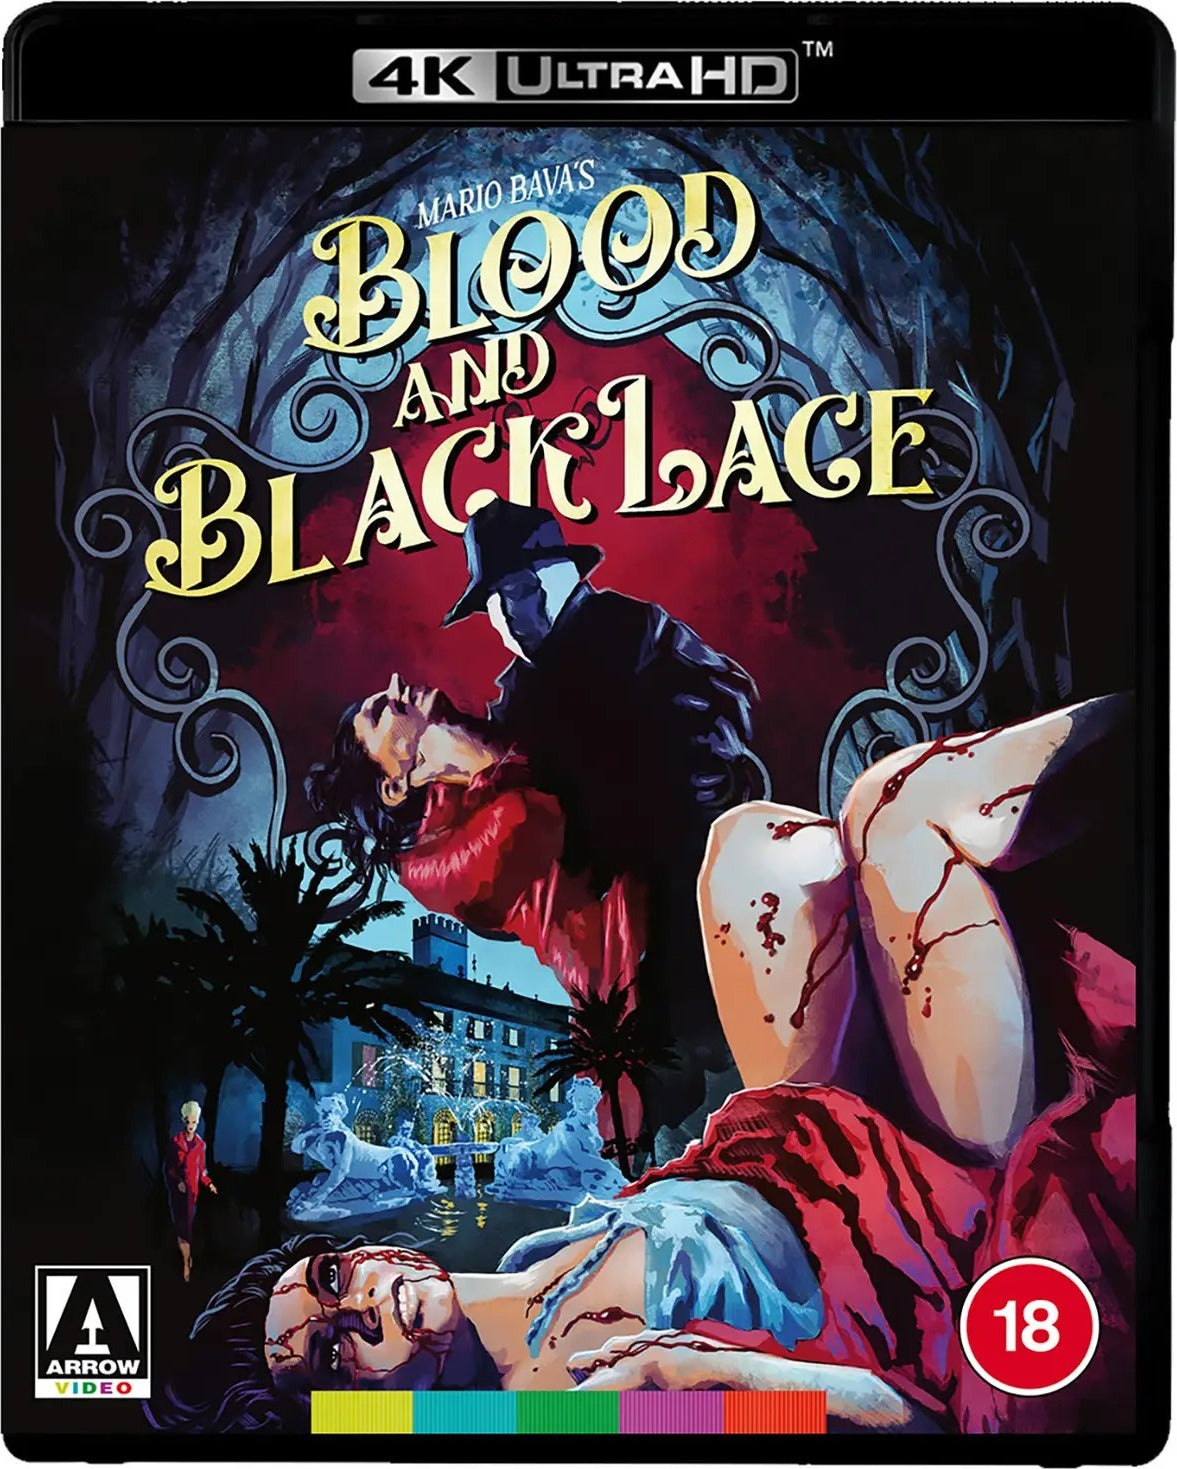 BLOOD AND BLACK LACE (REGION FREE IMPORT) 4K UHD